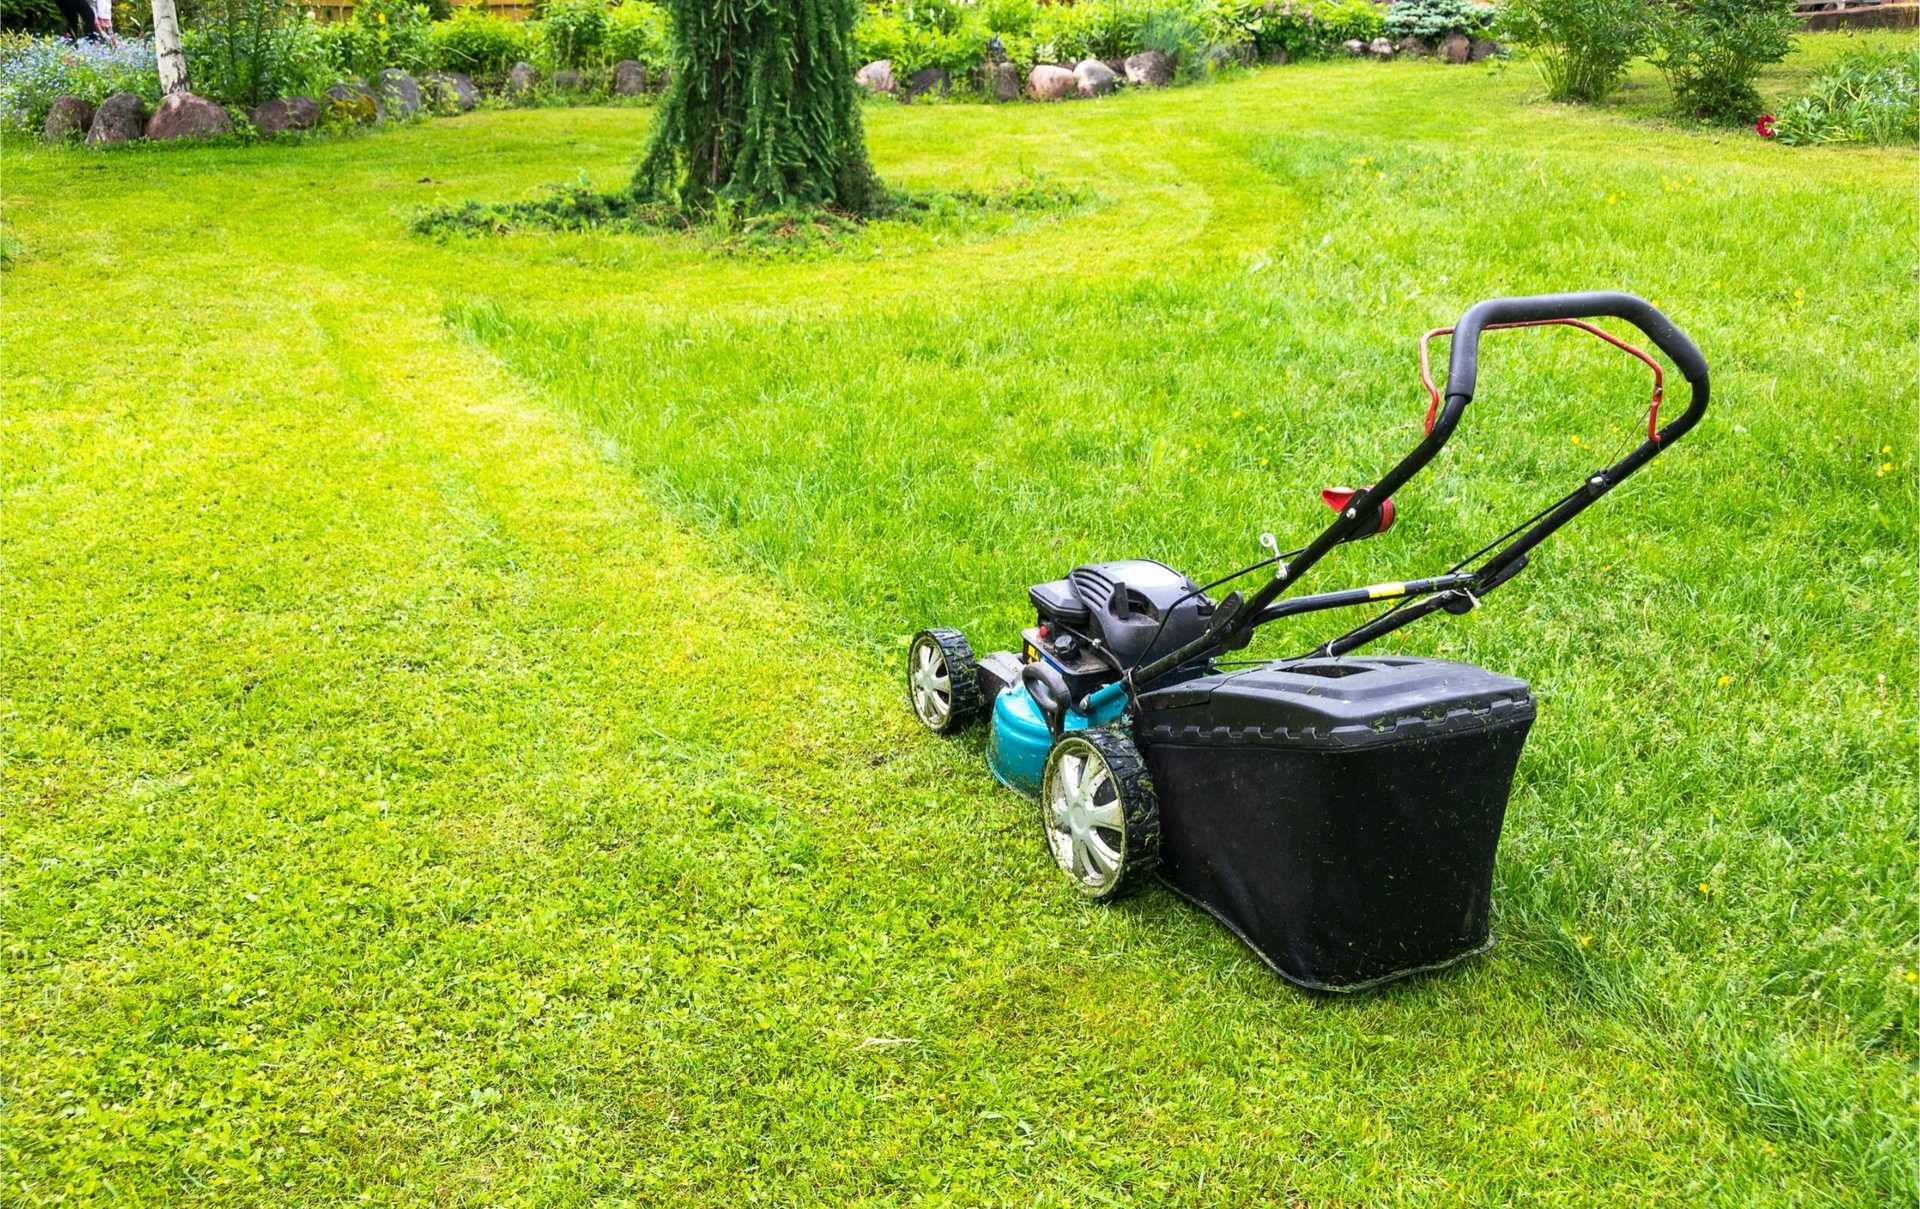 Best time to buy lawn mowers